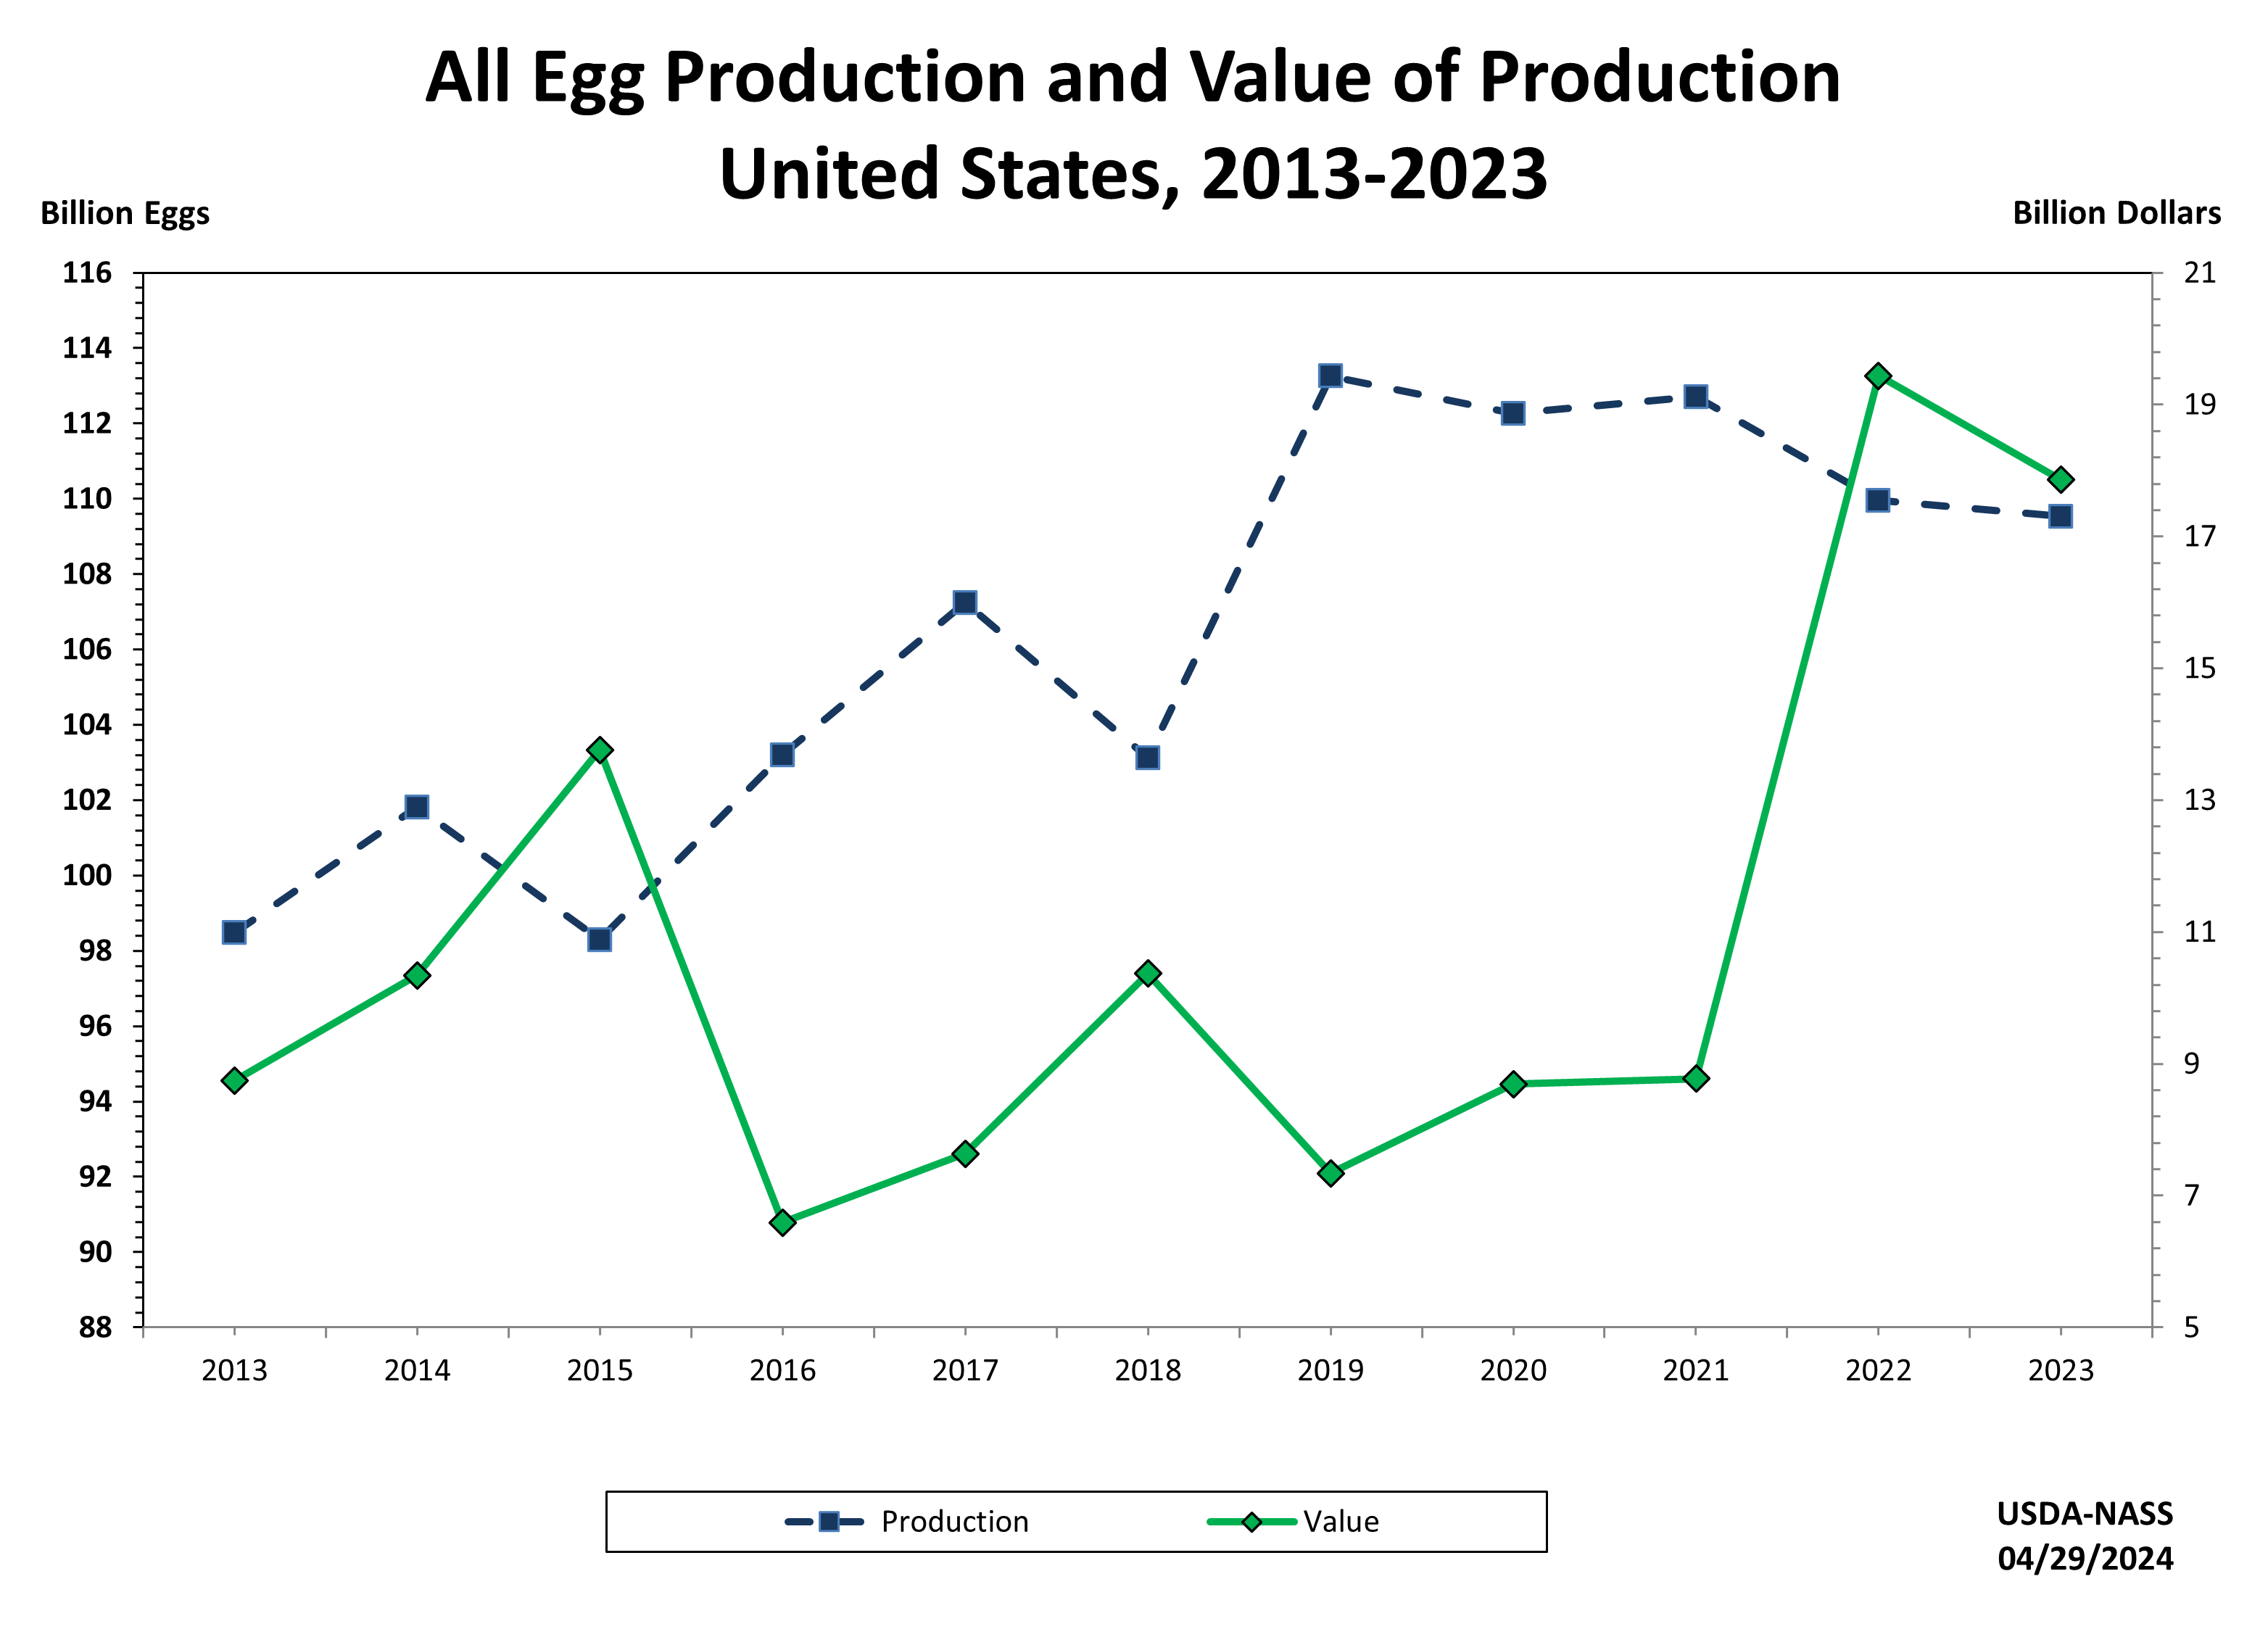 Eggs: Production and Value of Production by Year, US